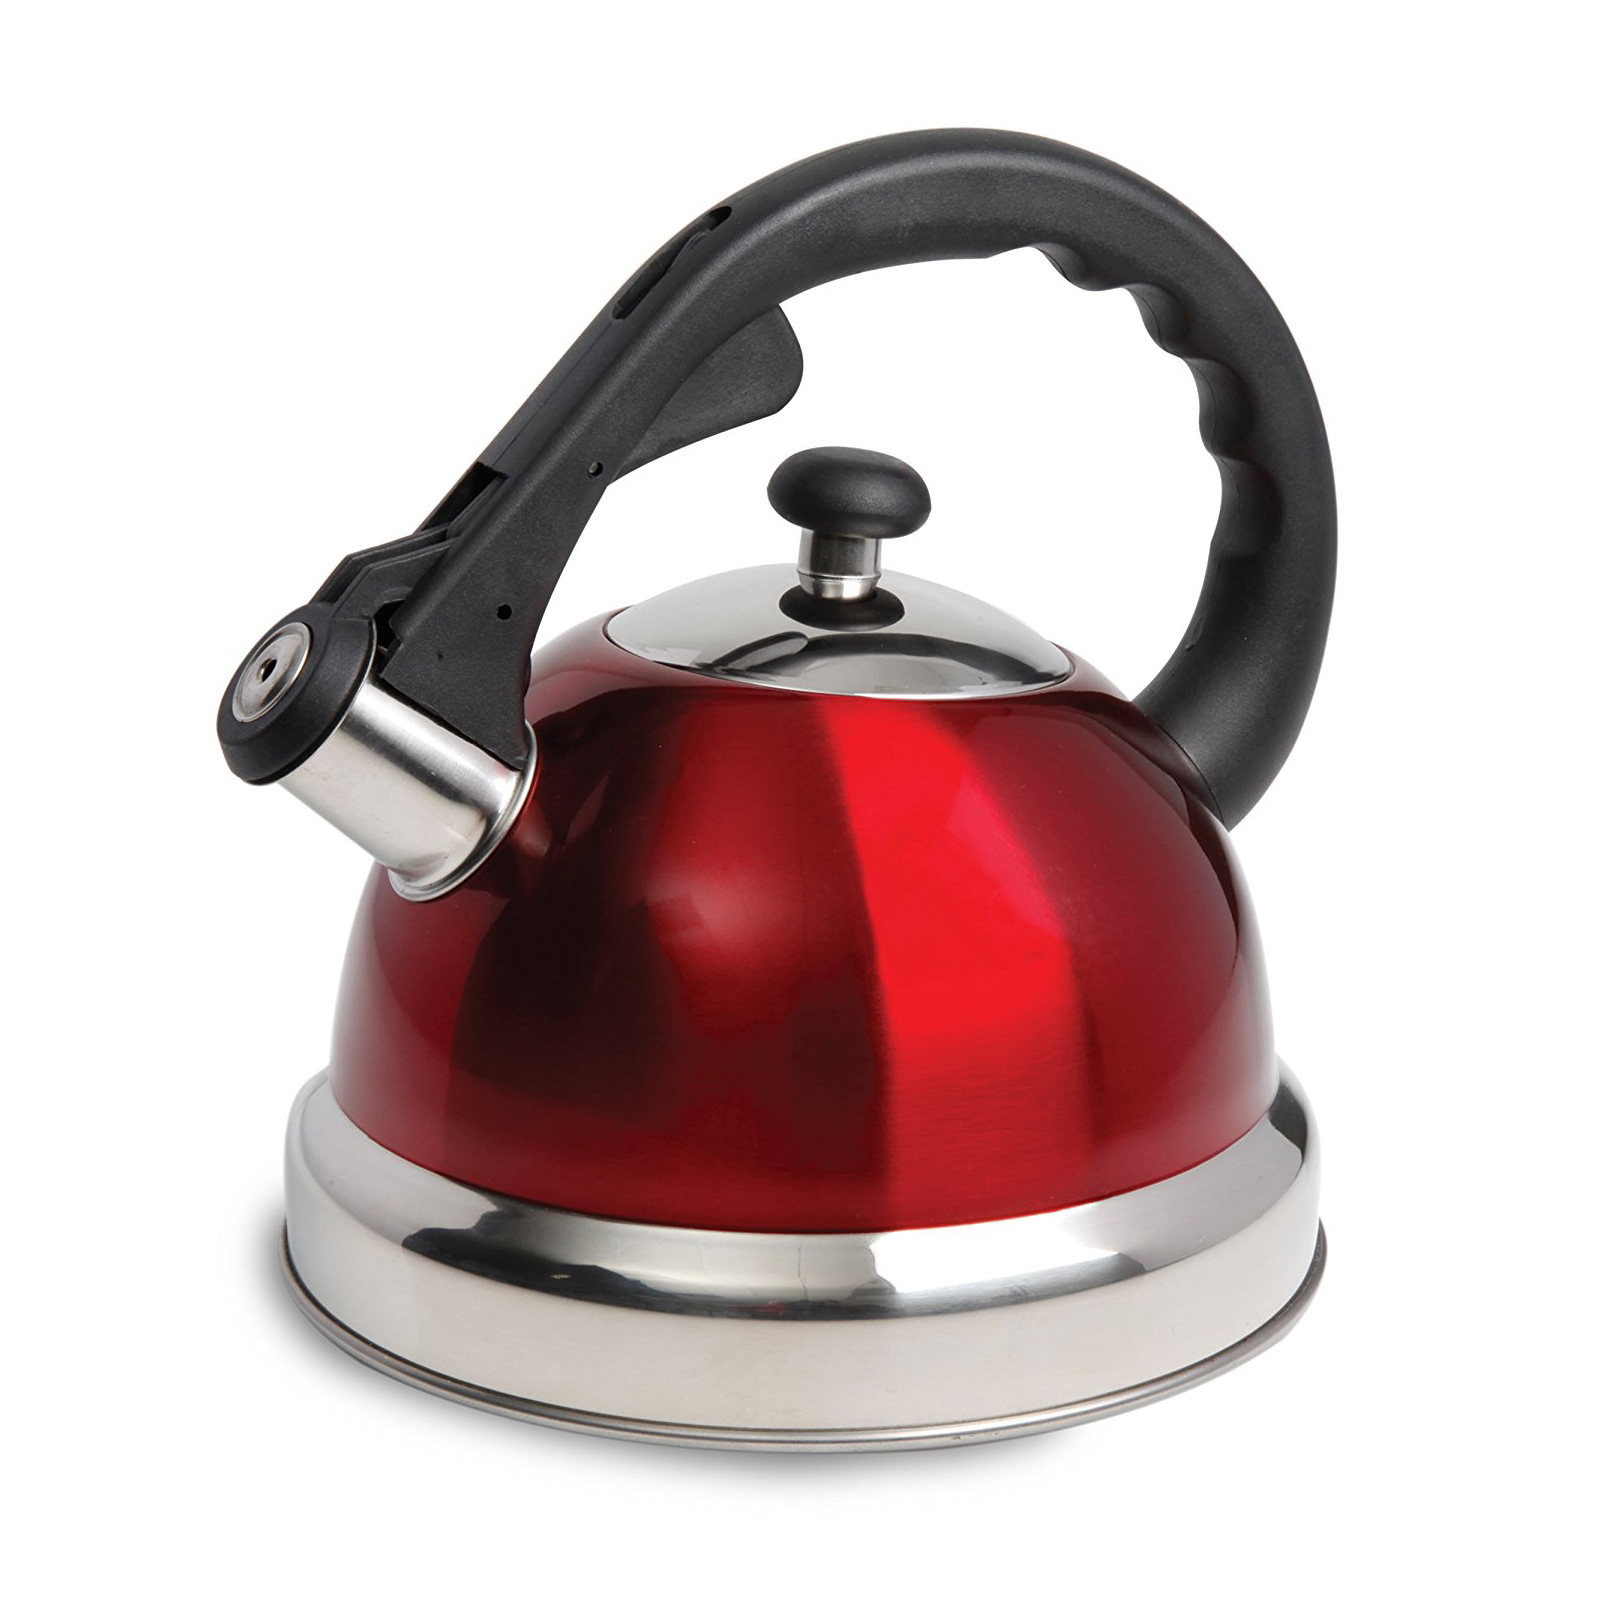 Mr. Coffee 970100683M Claredale 1.7 Qt Whistling Tea Kettle - Red